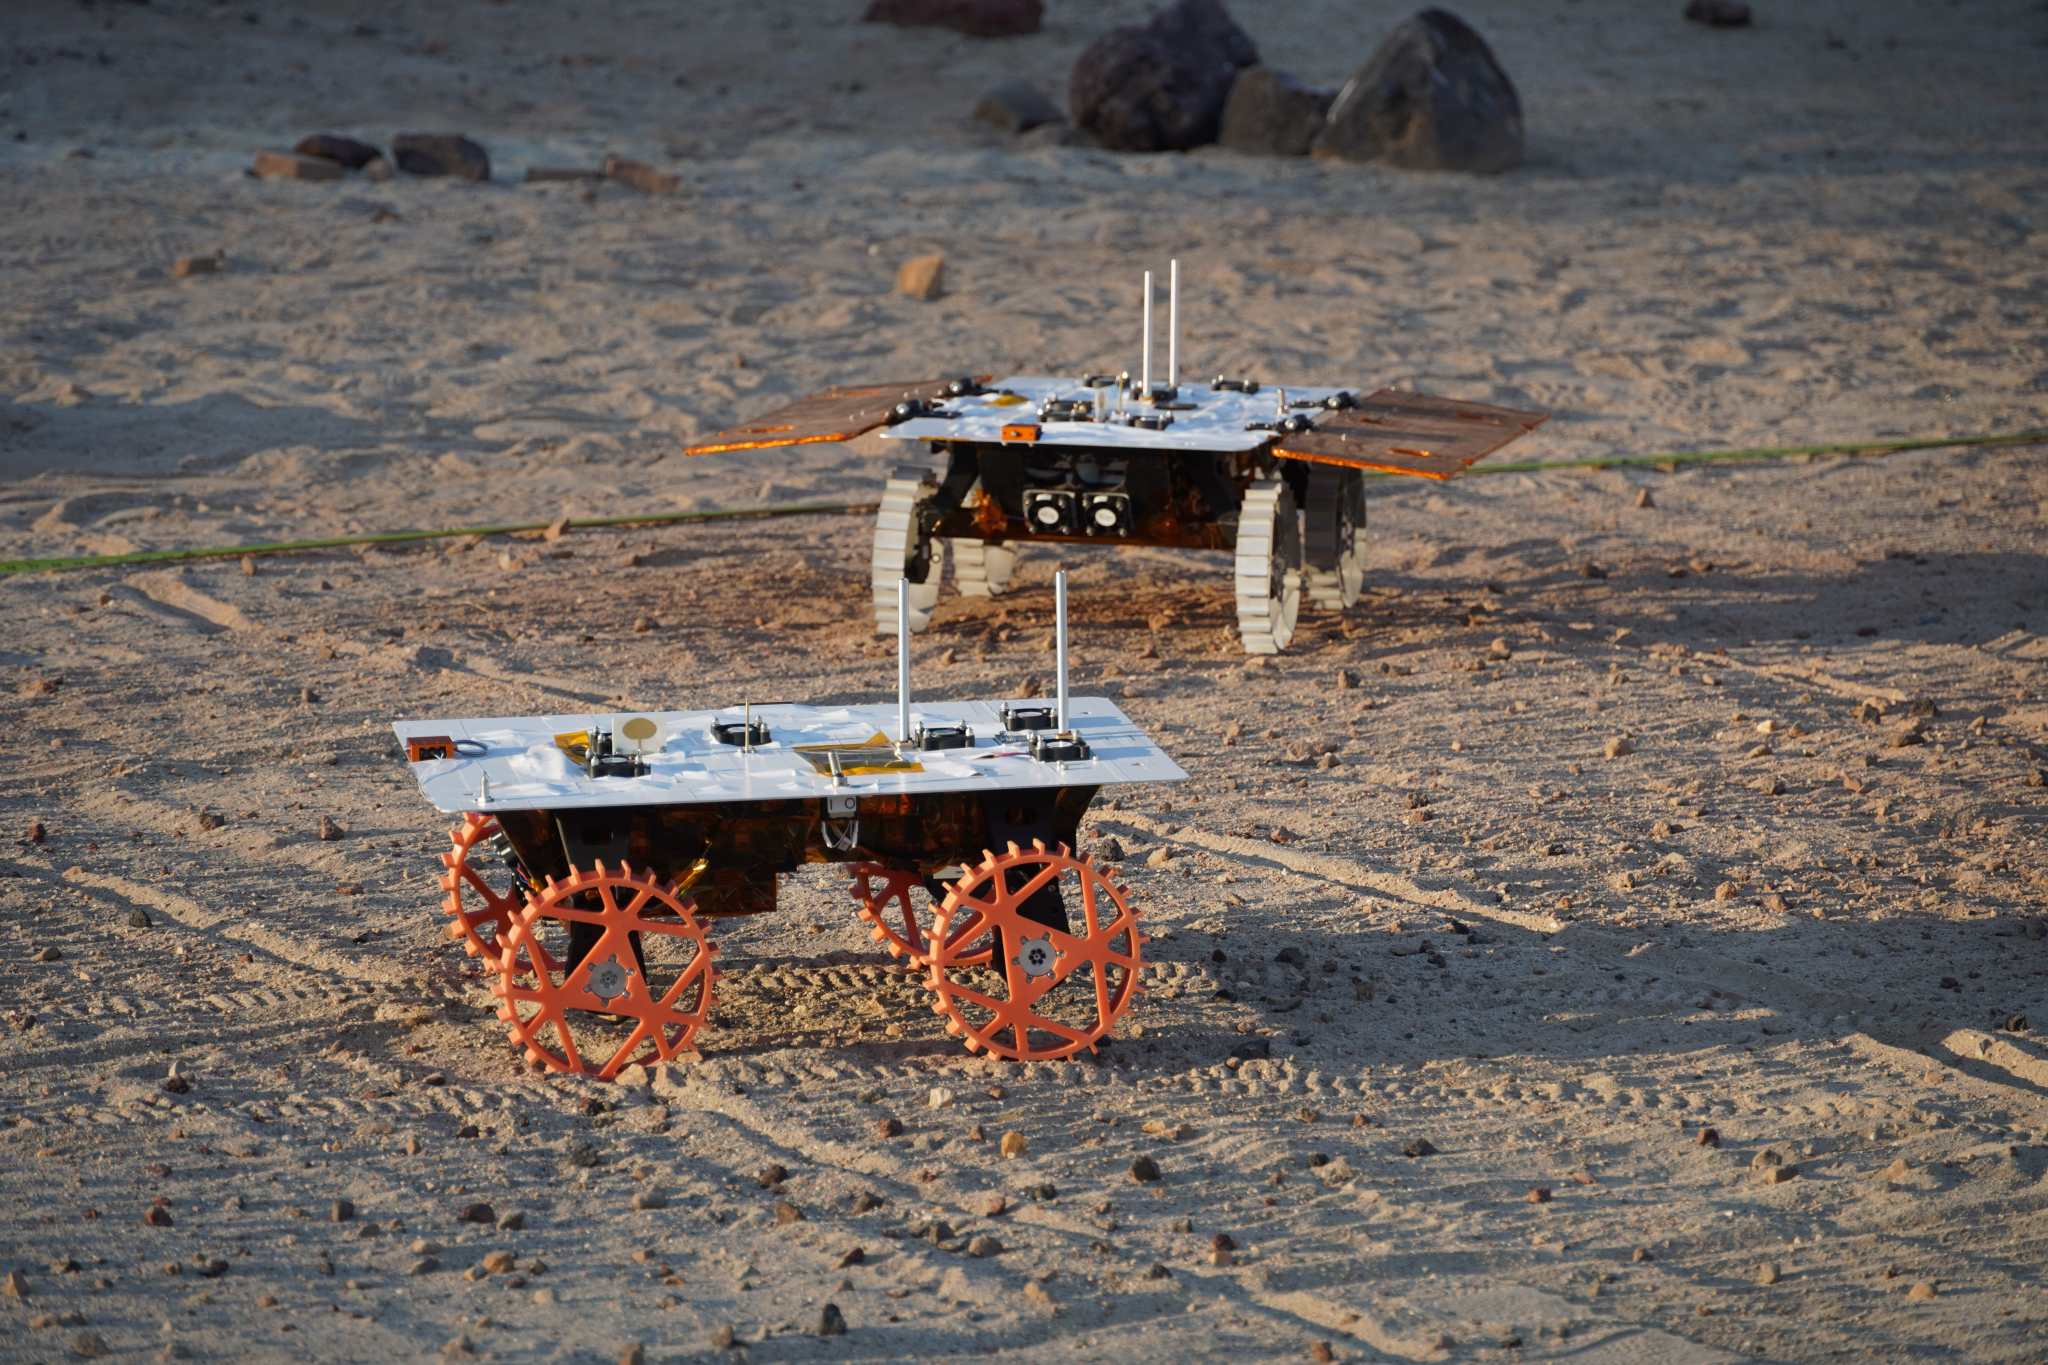 Two full-scale development model rovers